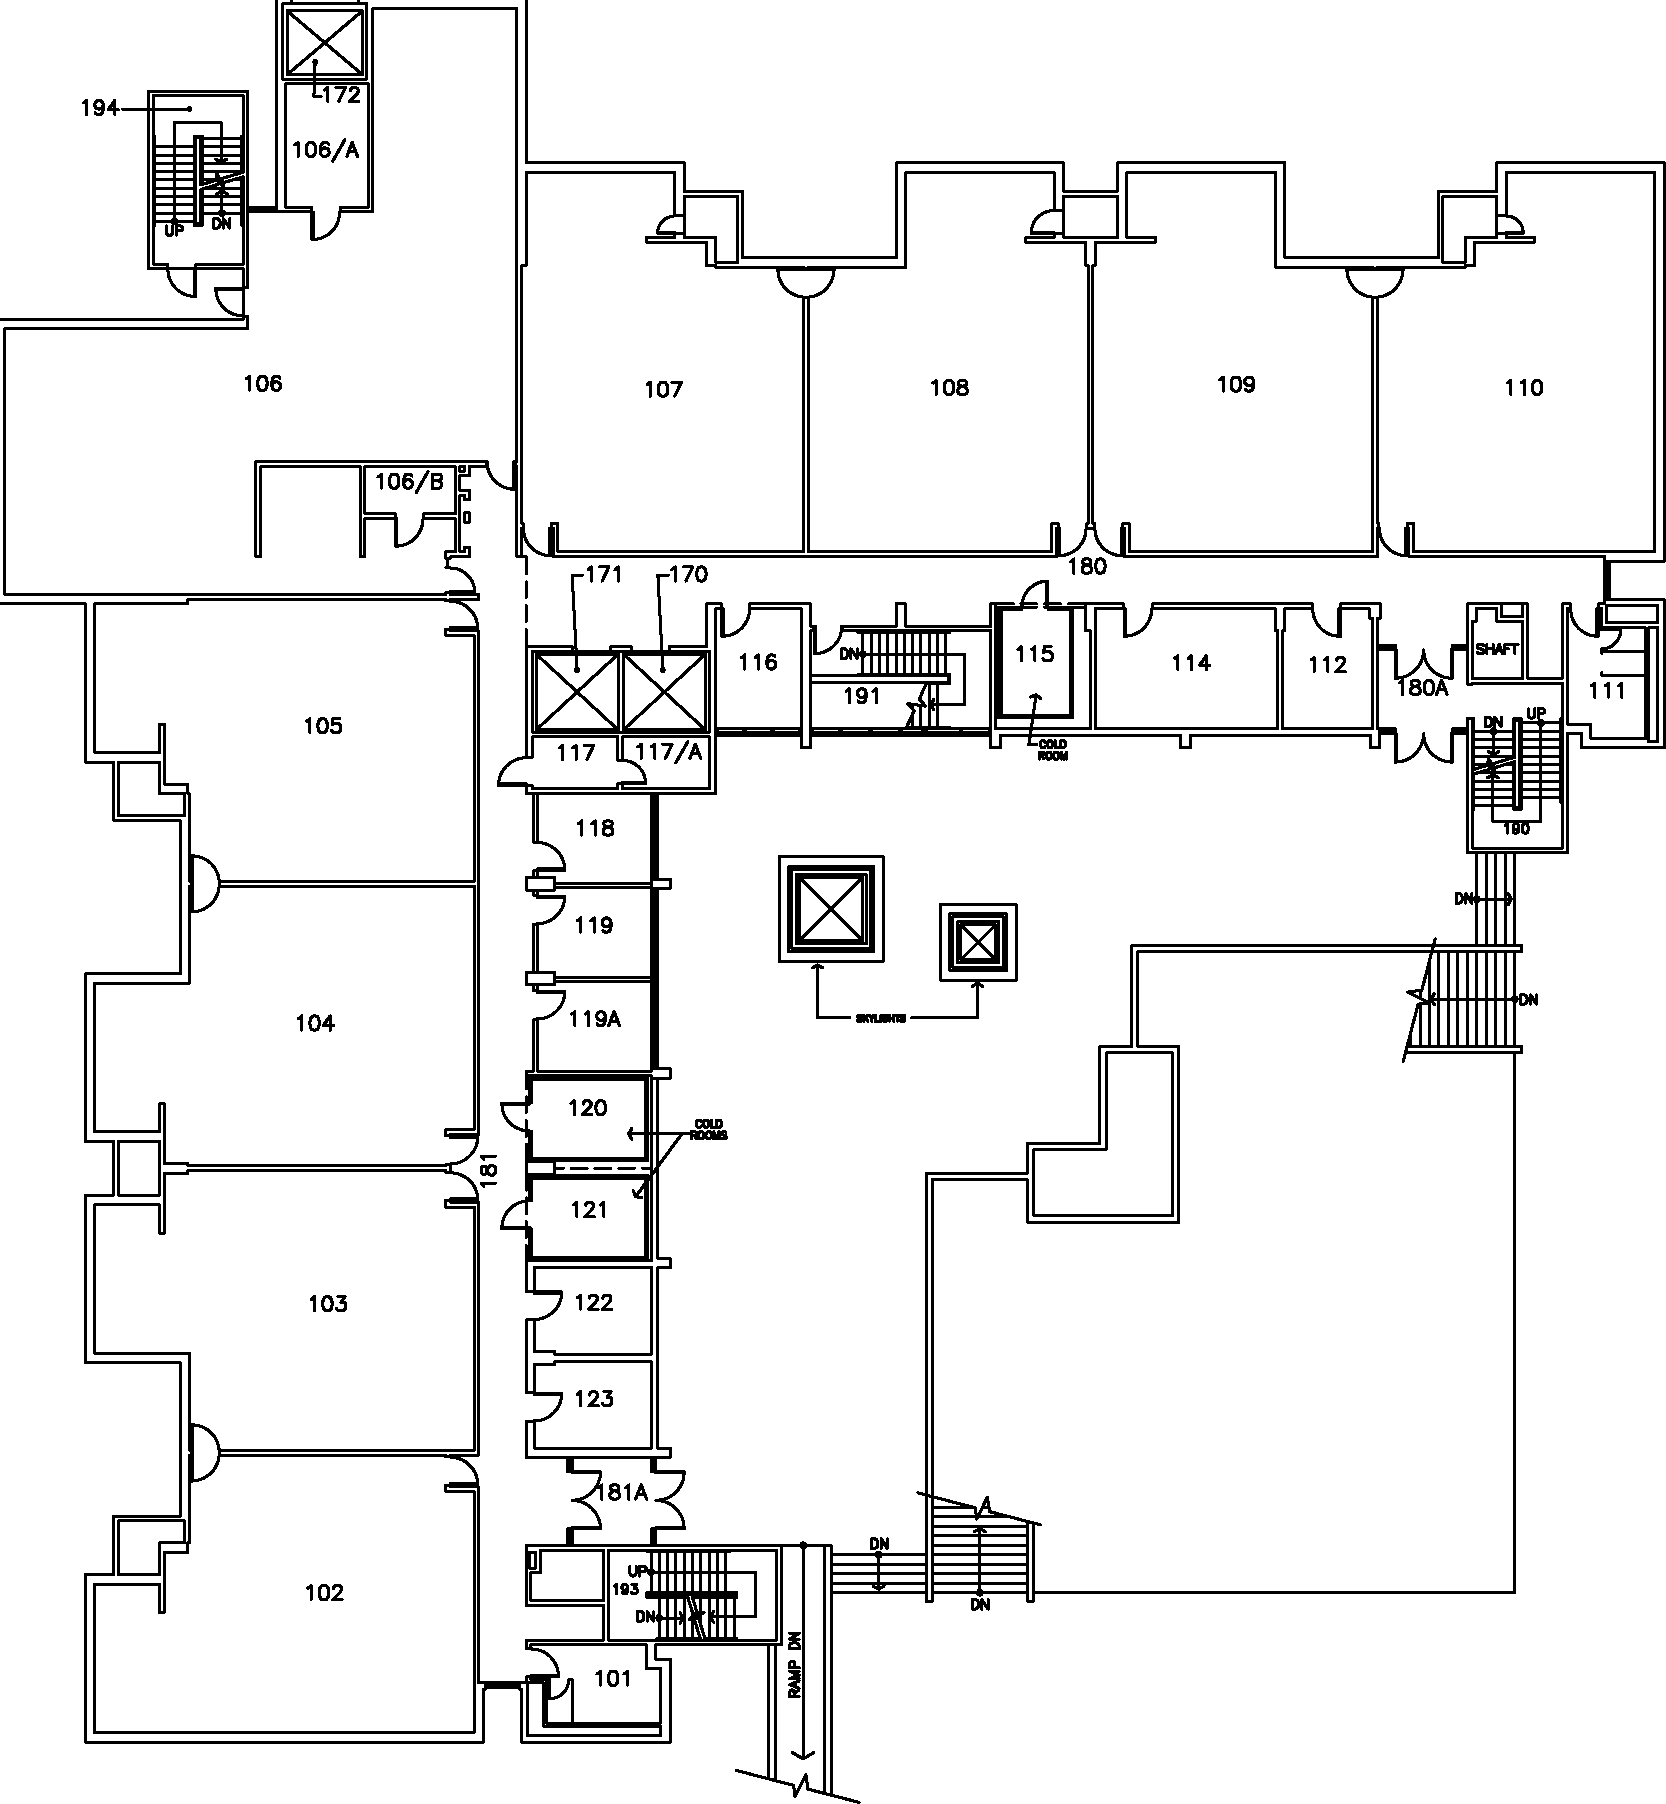 Life Science Building - First Floor Map